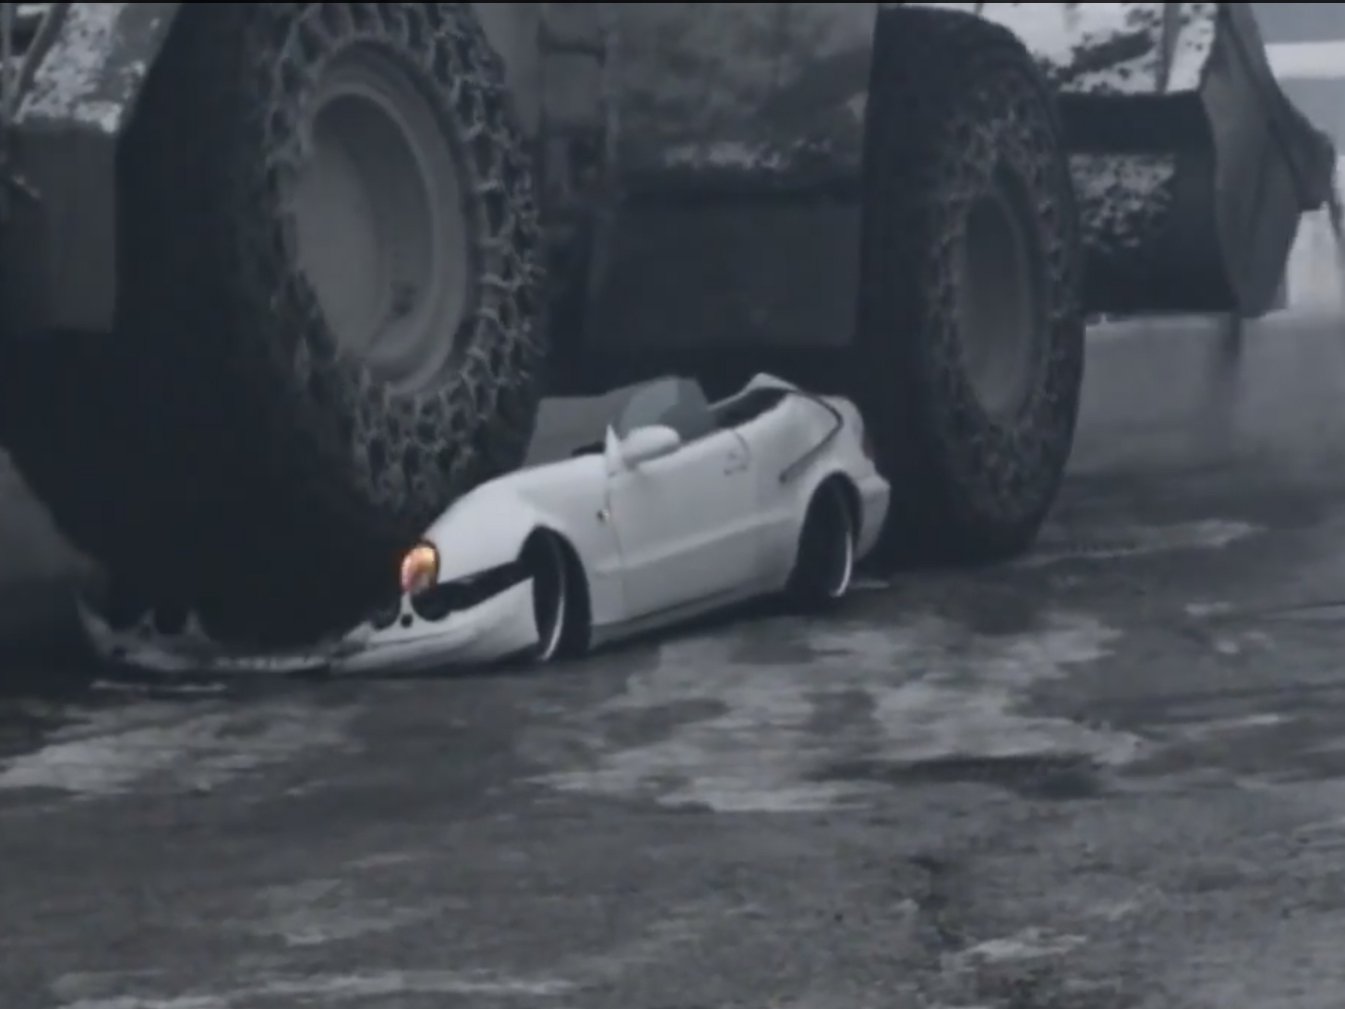 Video: Mercedes Coupe Crushed By BIG Front Loader - Real or Hoax?